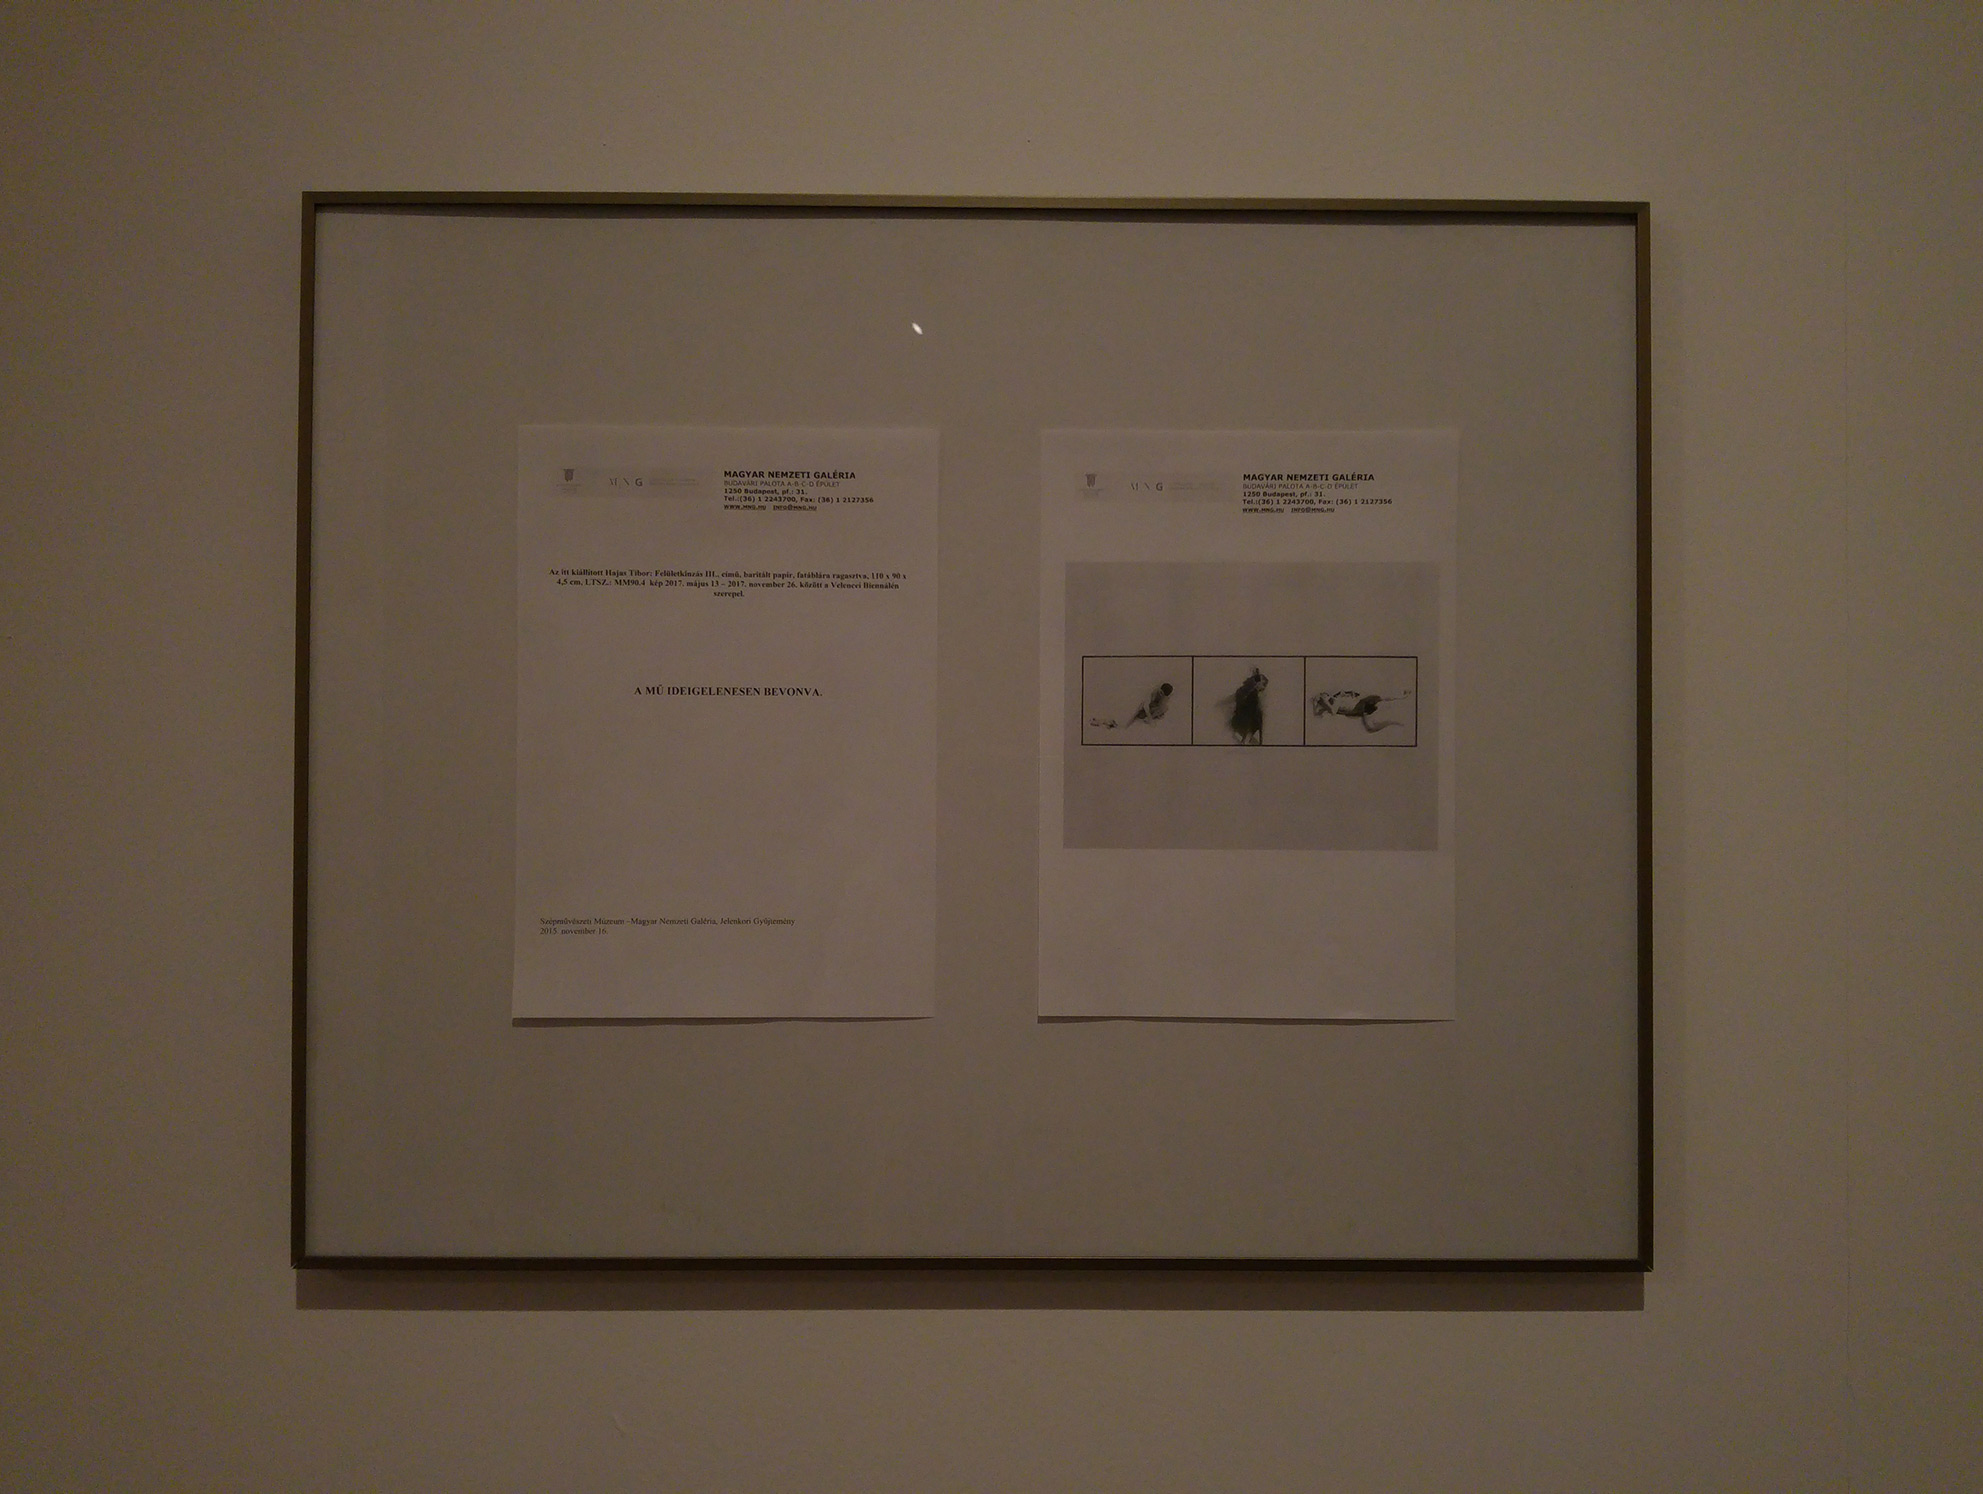 A note instead of the image at the permanent exhibition of the Contemporary Collection of MNG, 2018.